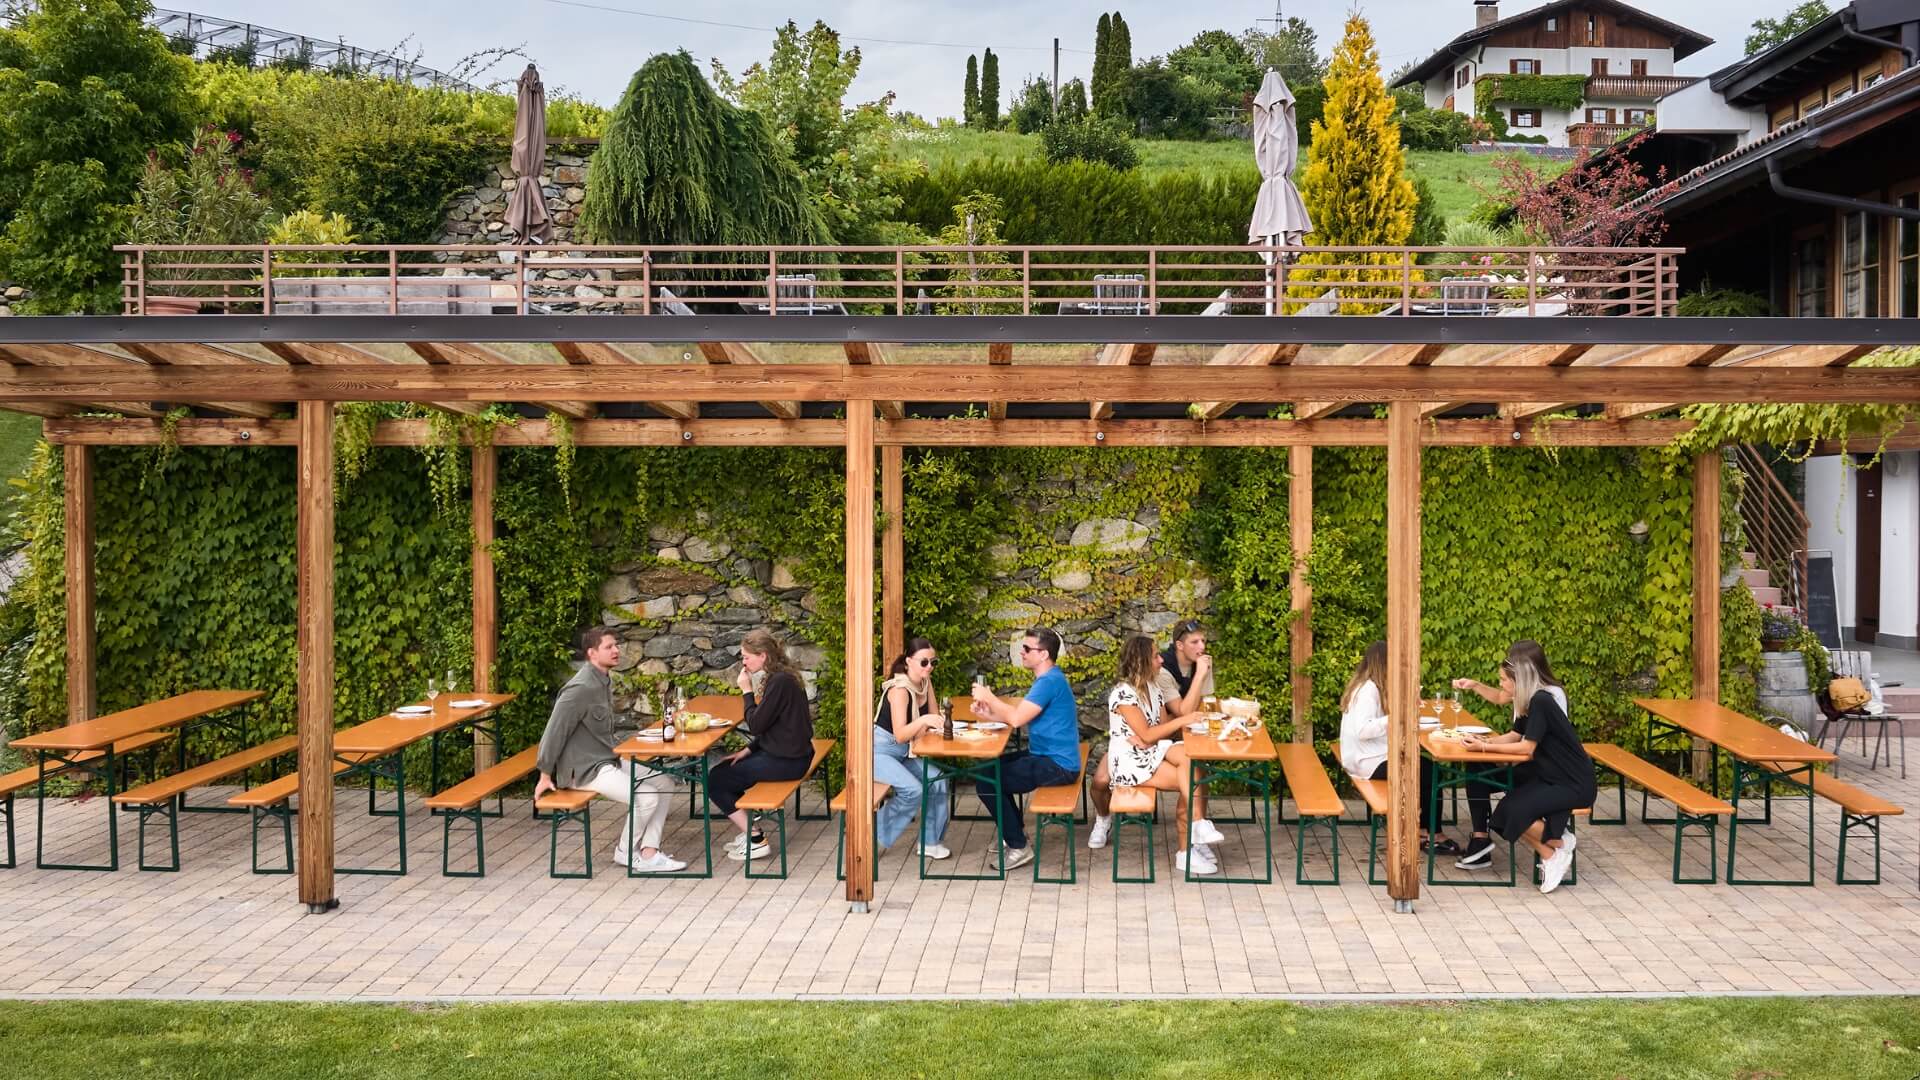 Several people have taken a seat on the classic beer garden table sets at the Guggerhof.